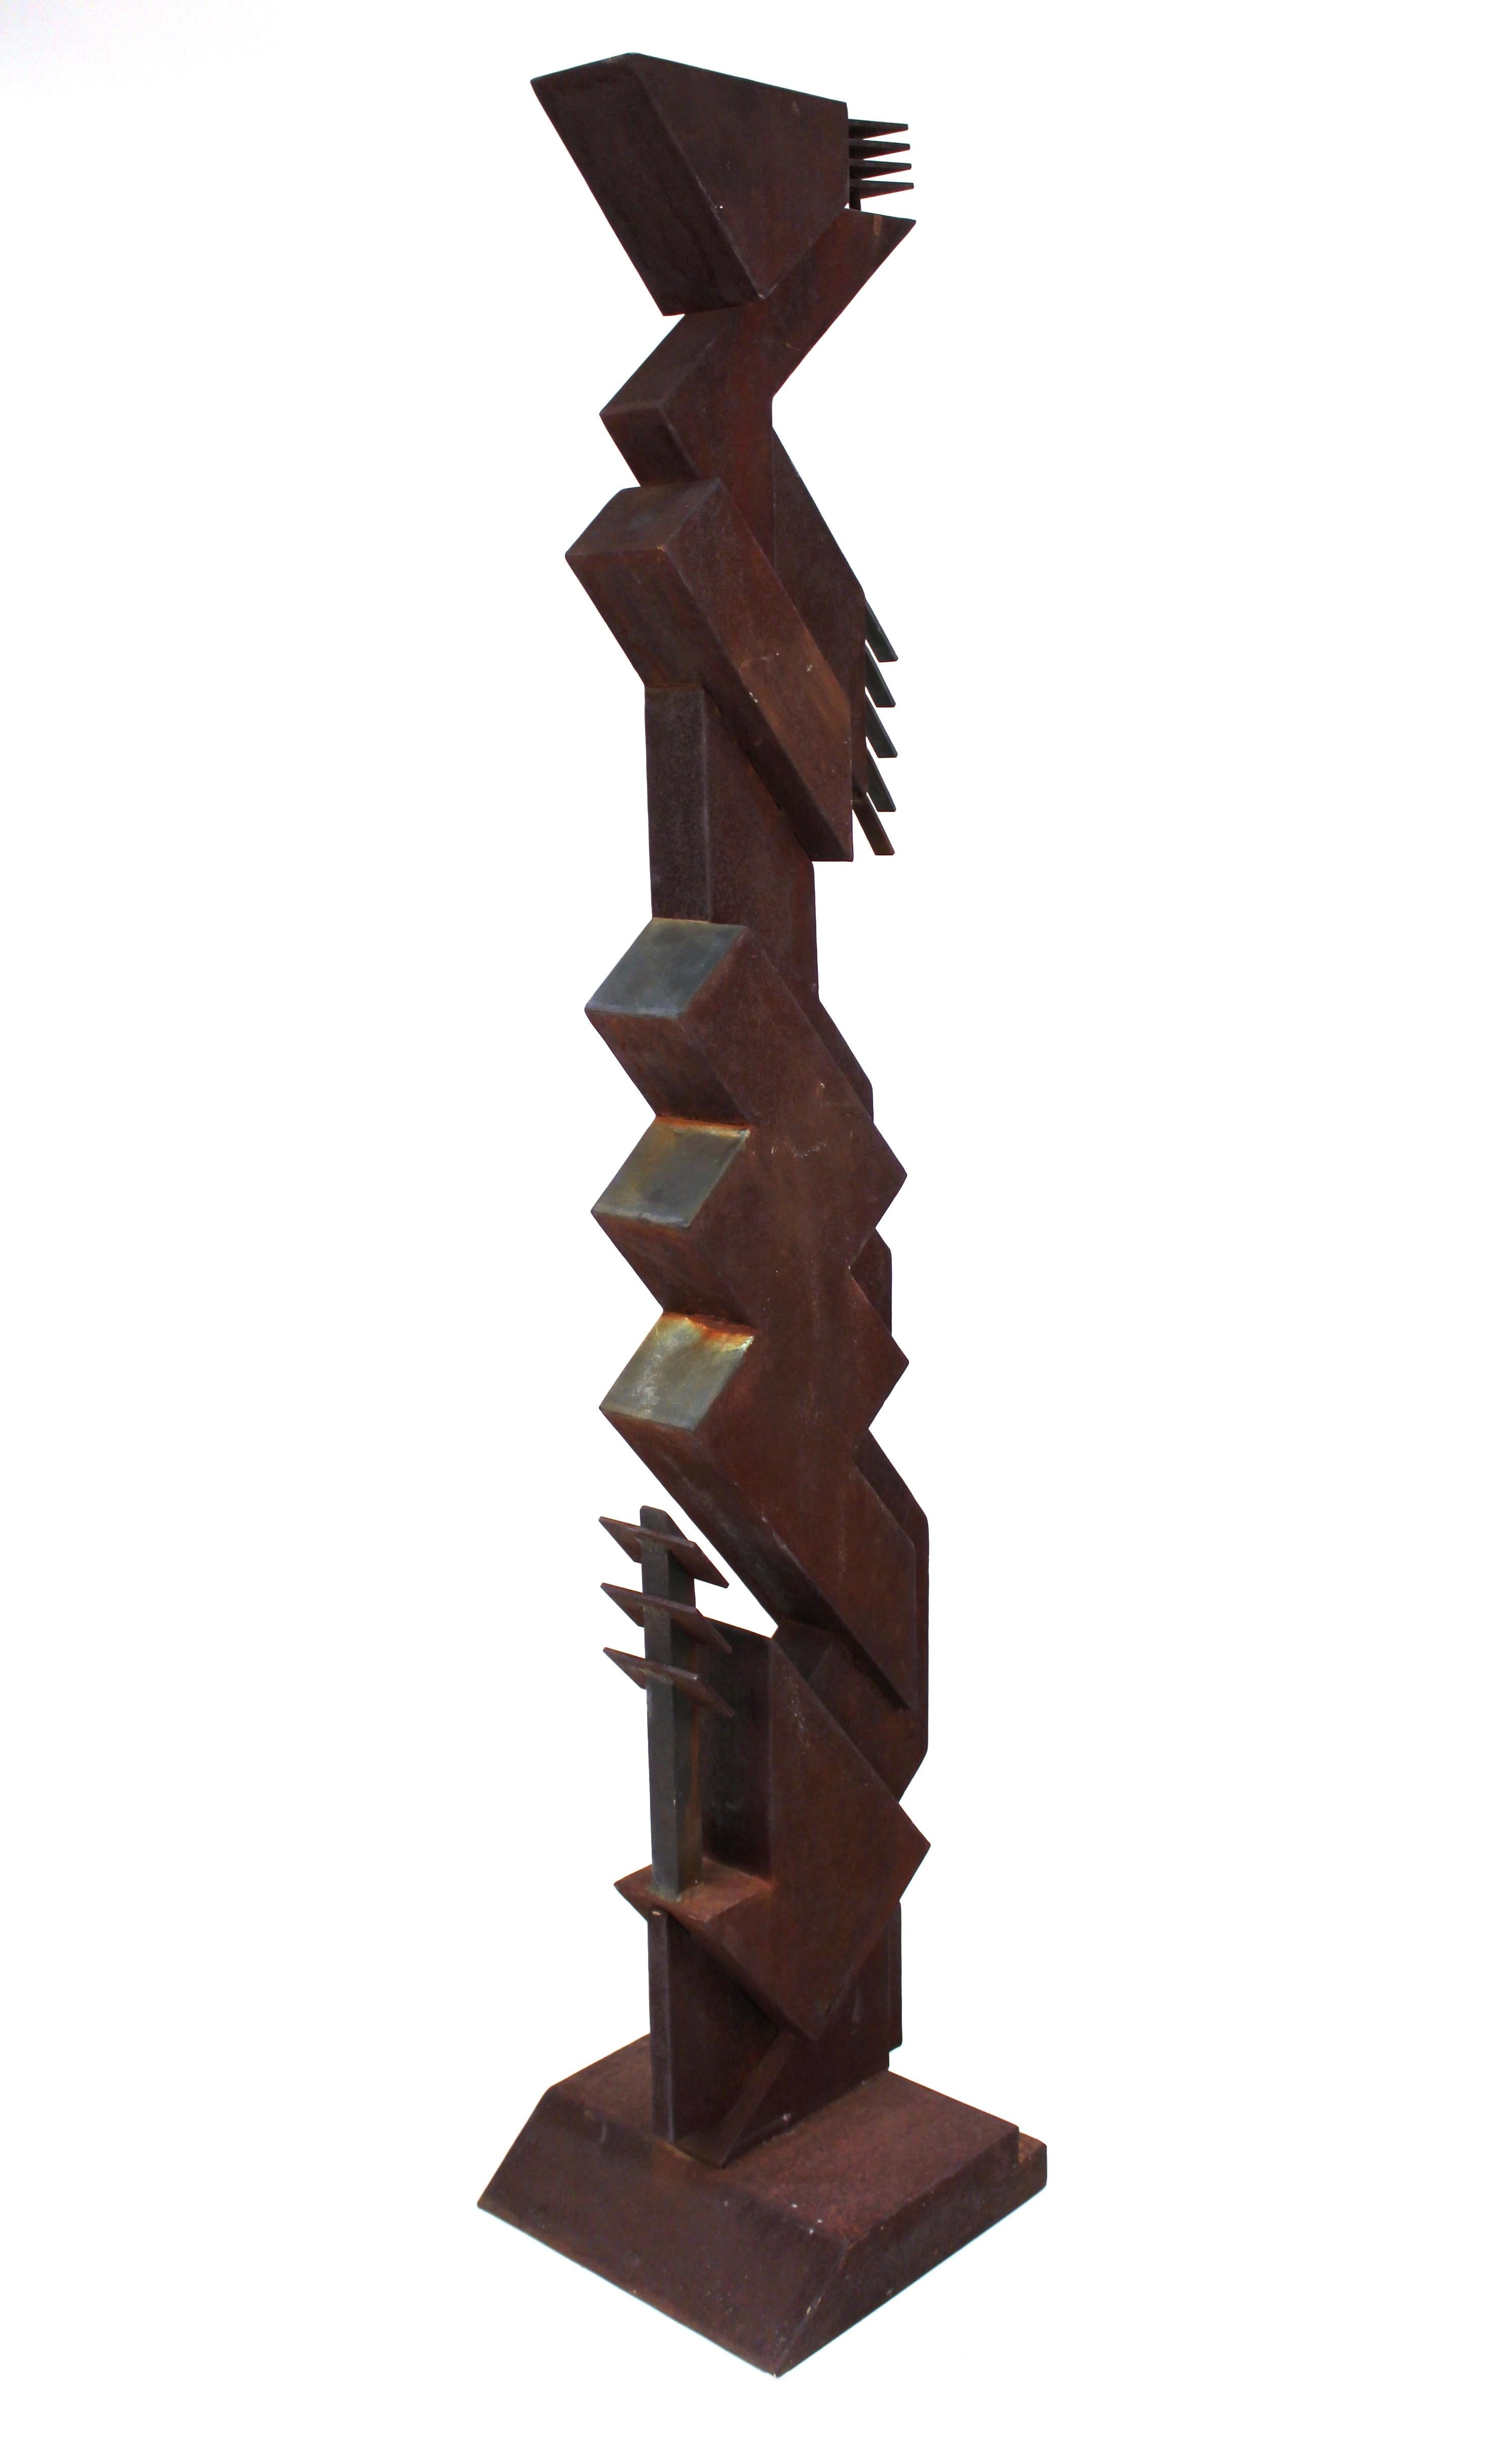 American Modern abstract-Brutalist TOTEM sculpture with geometric structure, in carbon steel and bronze. The piece is reminiscent of design elements of the Prairie Style and was made in the United States in the 1970s. Age-appropriate patina with